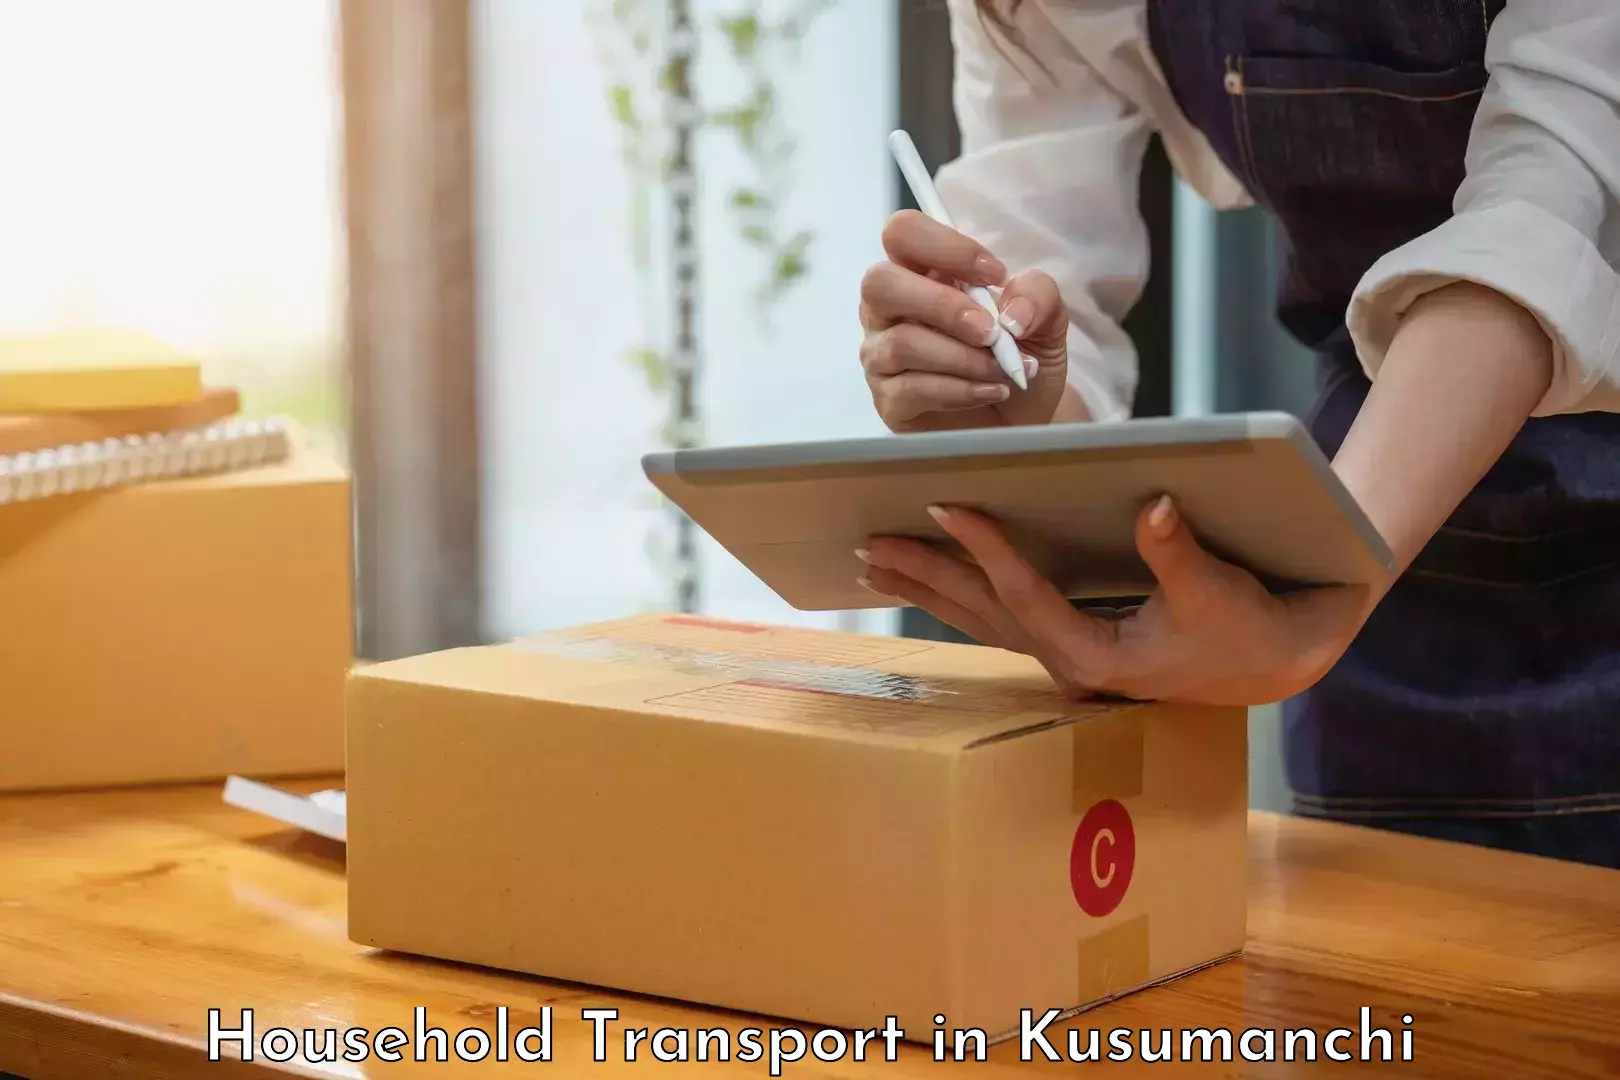 Efficient relocation services in Kusumanchi